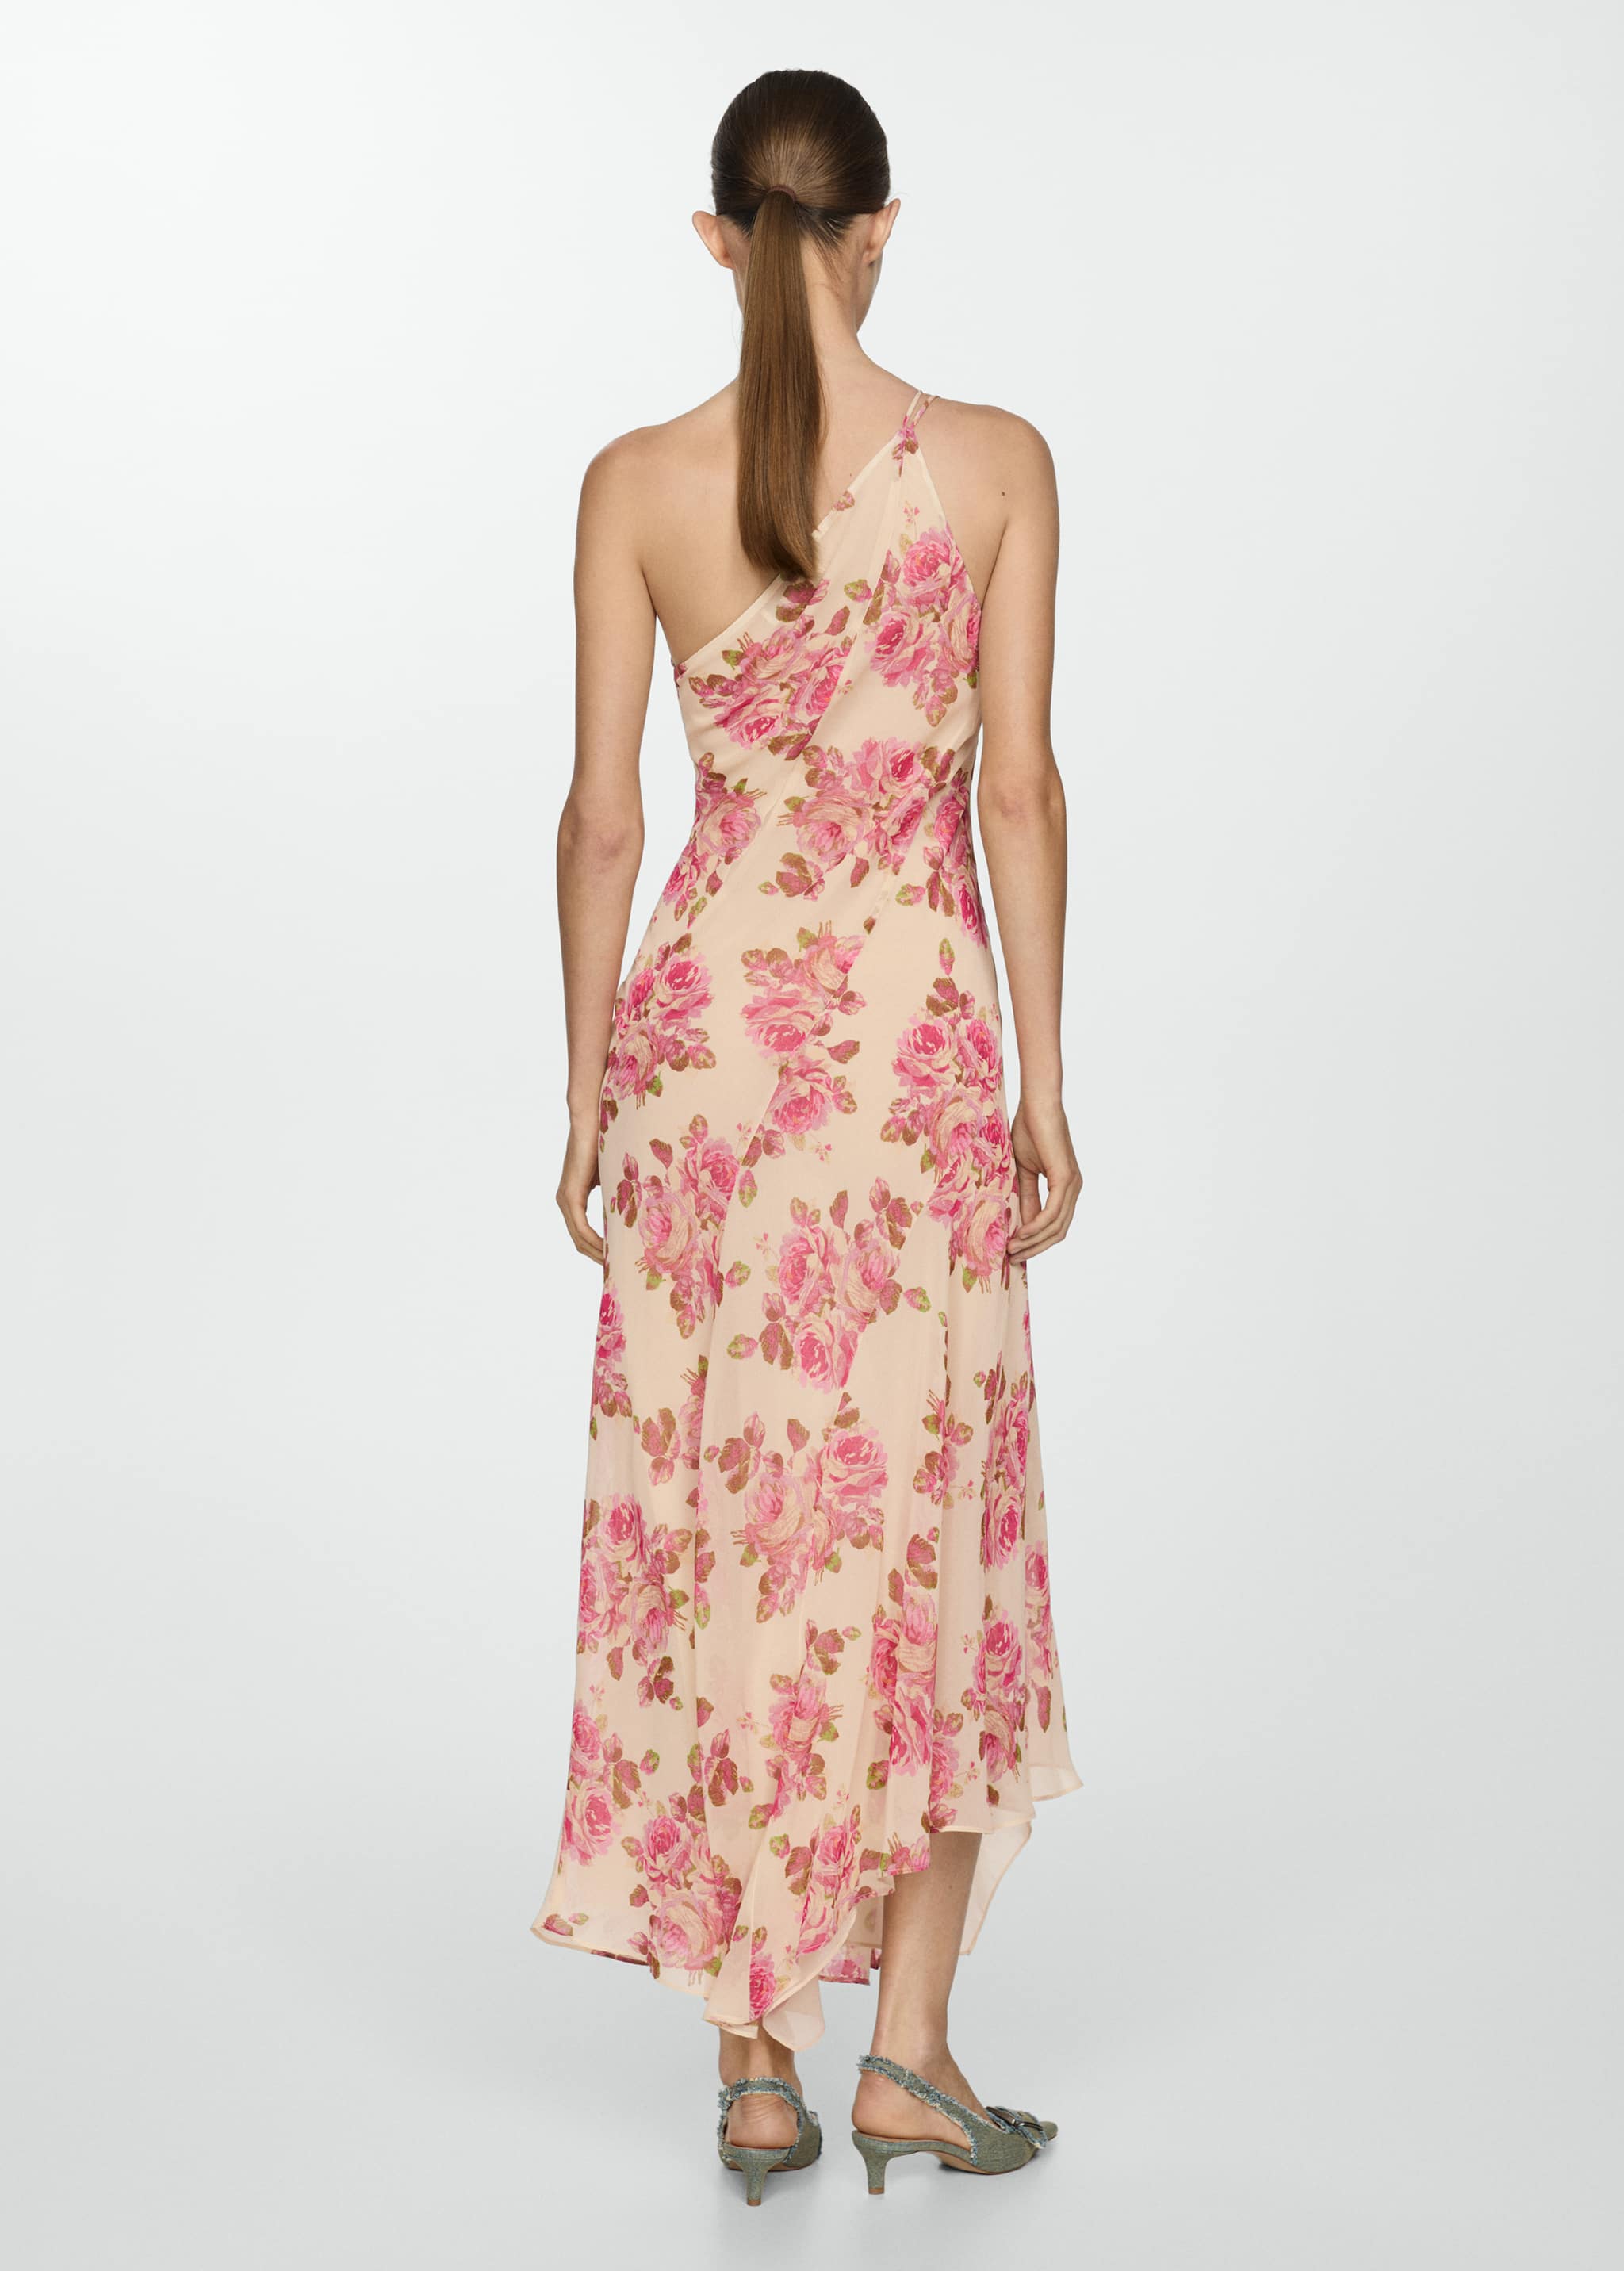 Asymmetrical floral dress - Reverse of the article